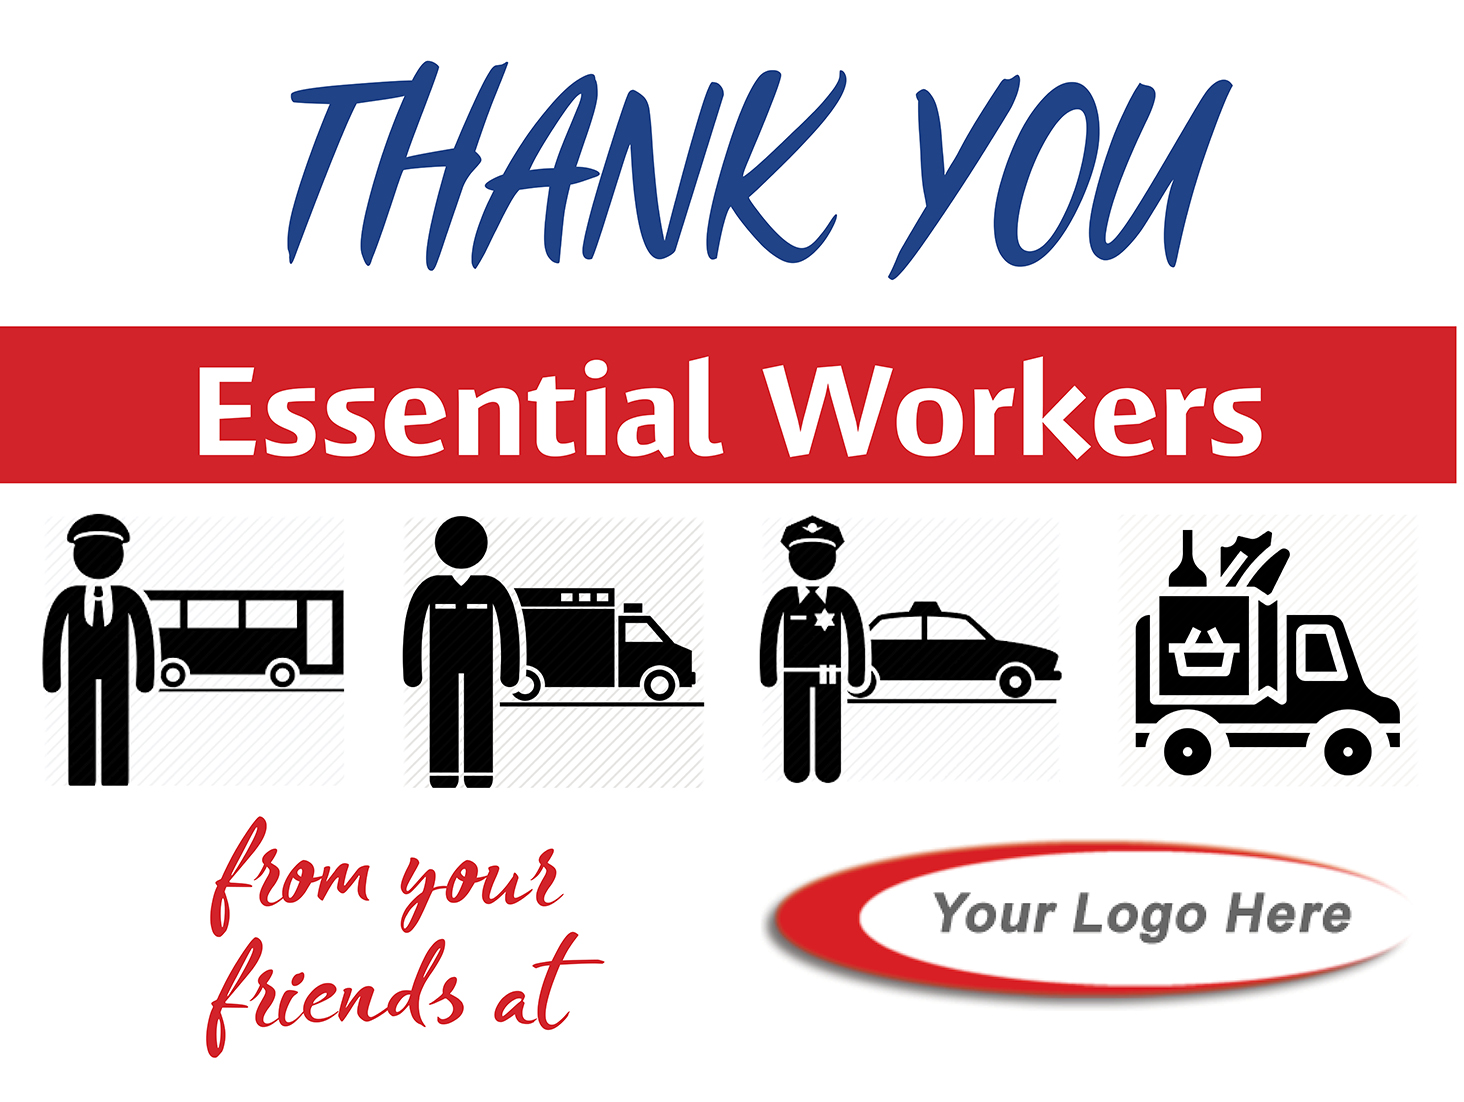 Essential Workers Thank You